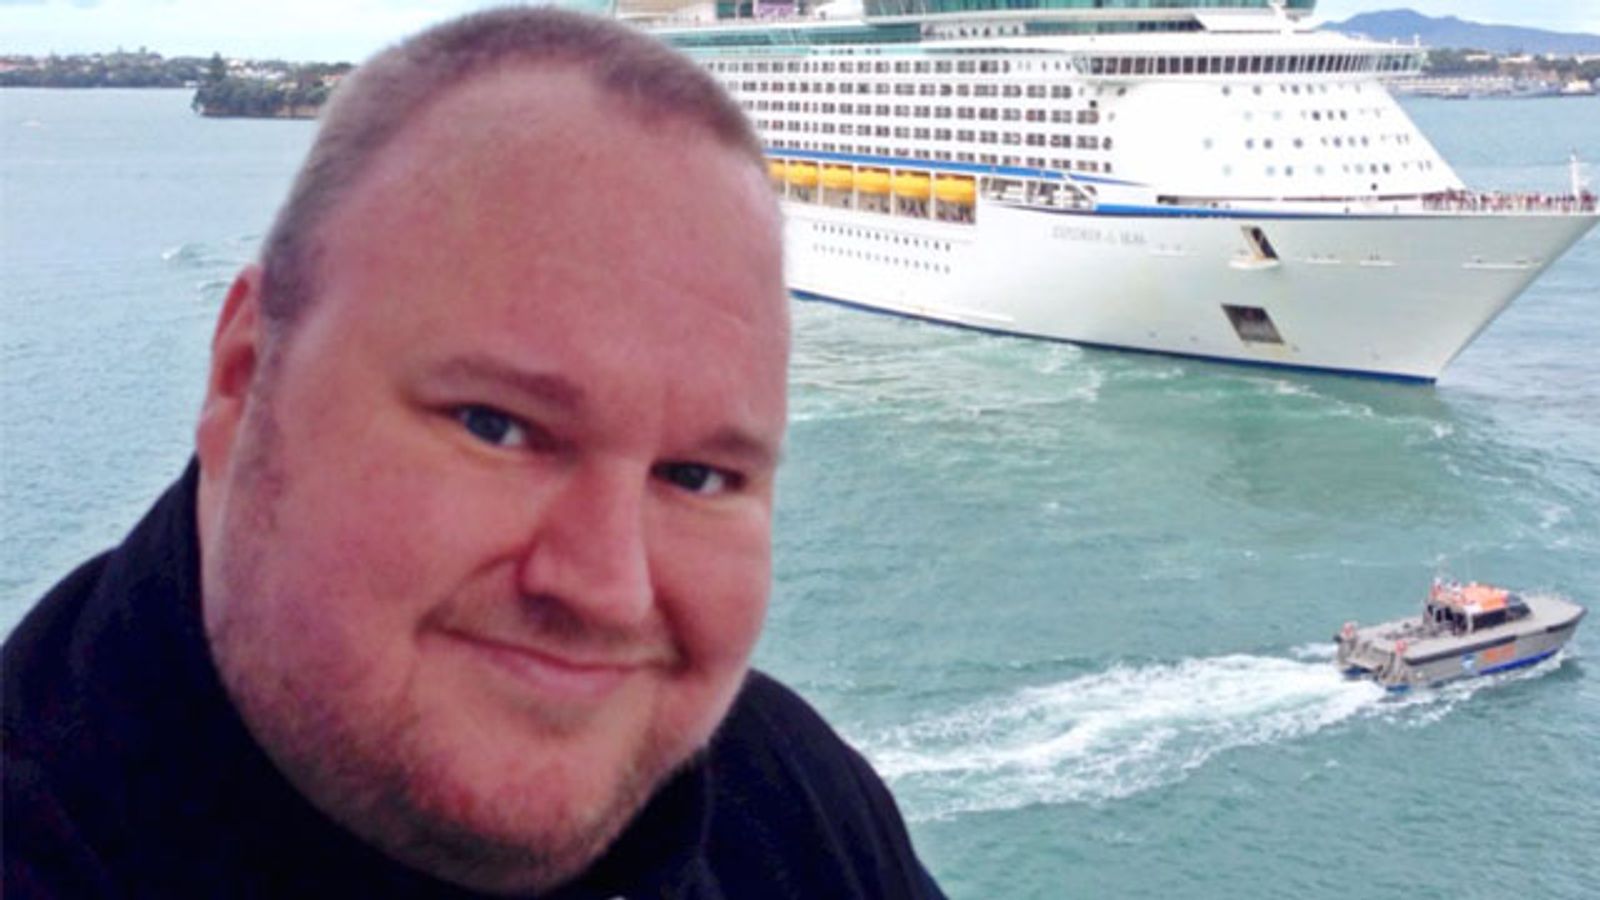 New Zealand Judge Rules Kim Dotcom Can Be Extradited To U.S.